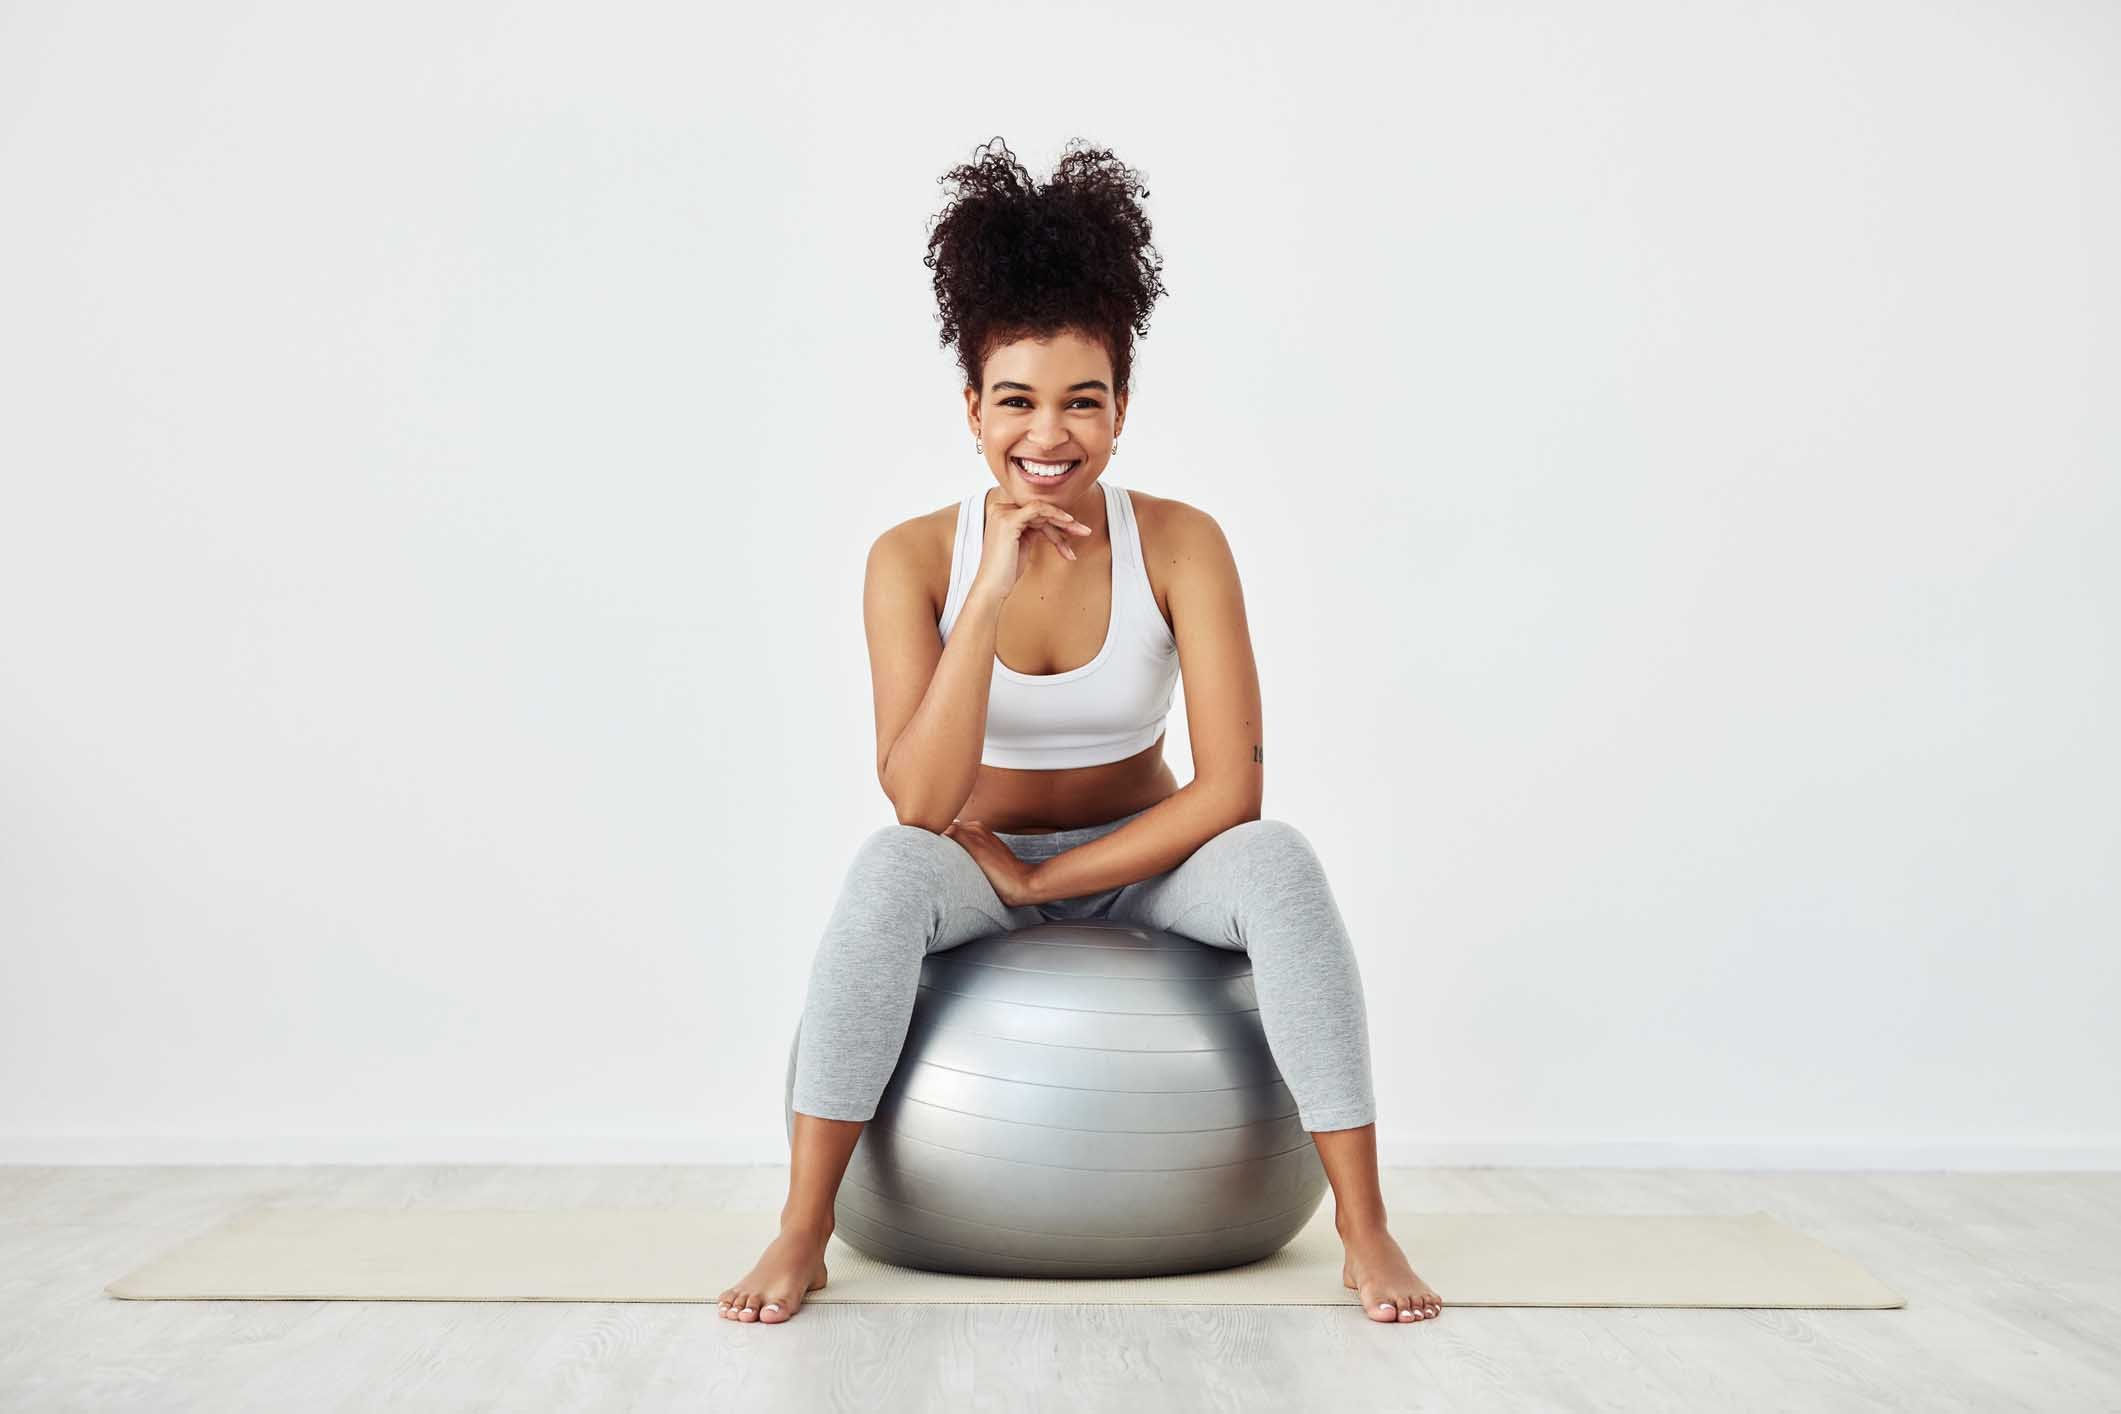 Your Guide to Working Out With an Overactive Pelvic Floor - The